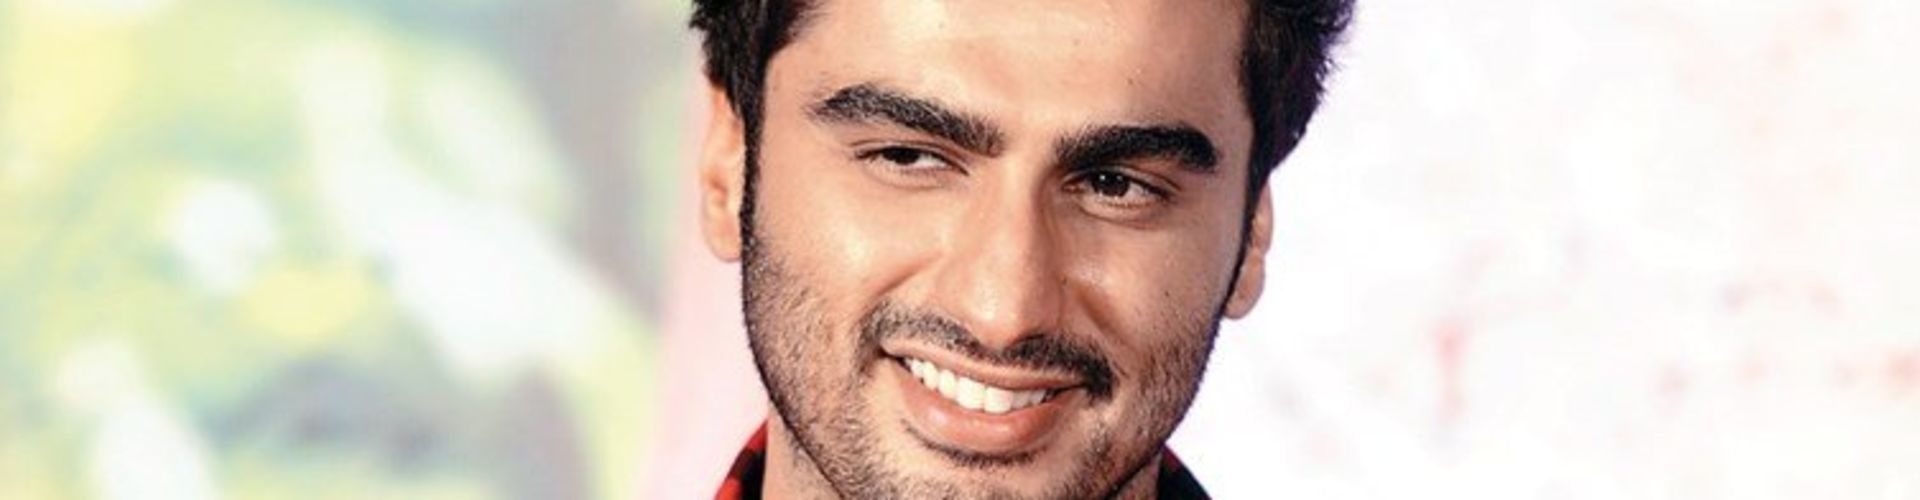 It’s time for me to expand my horizon and pursue my passions says Arjun Kapoor